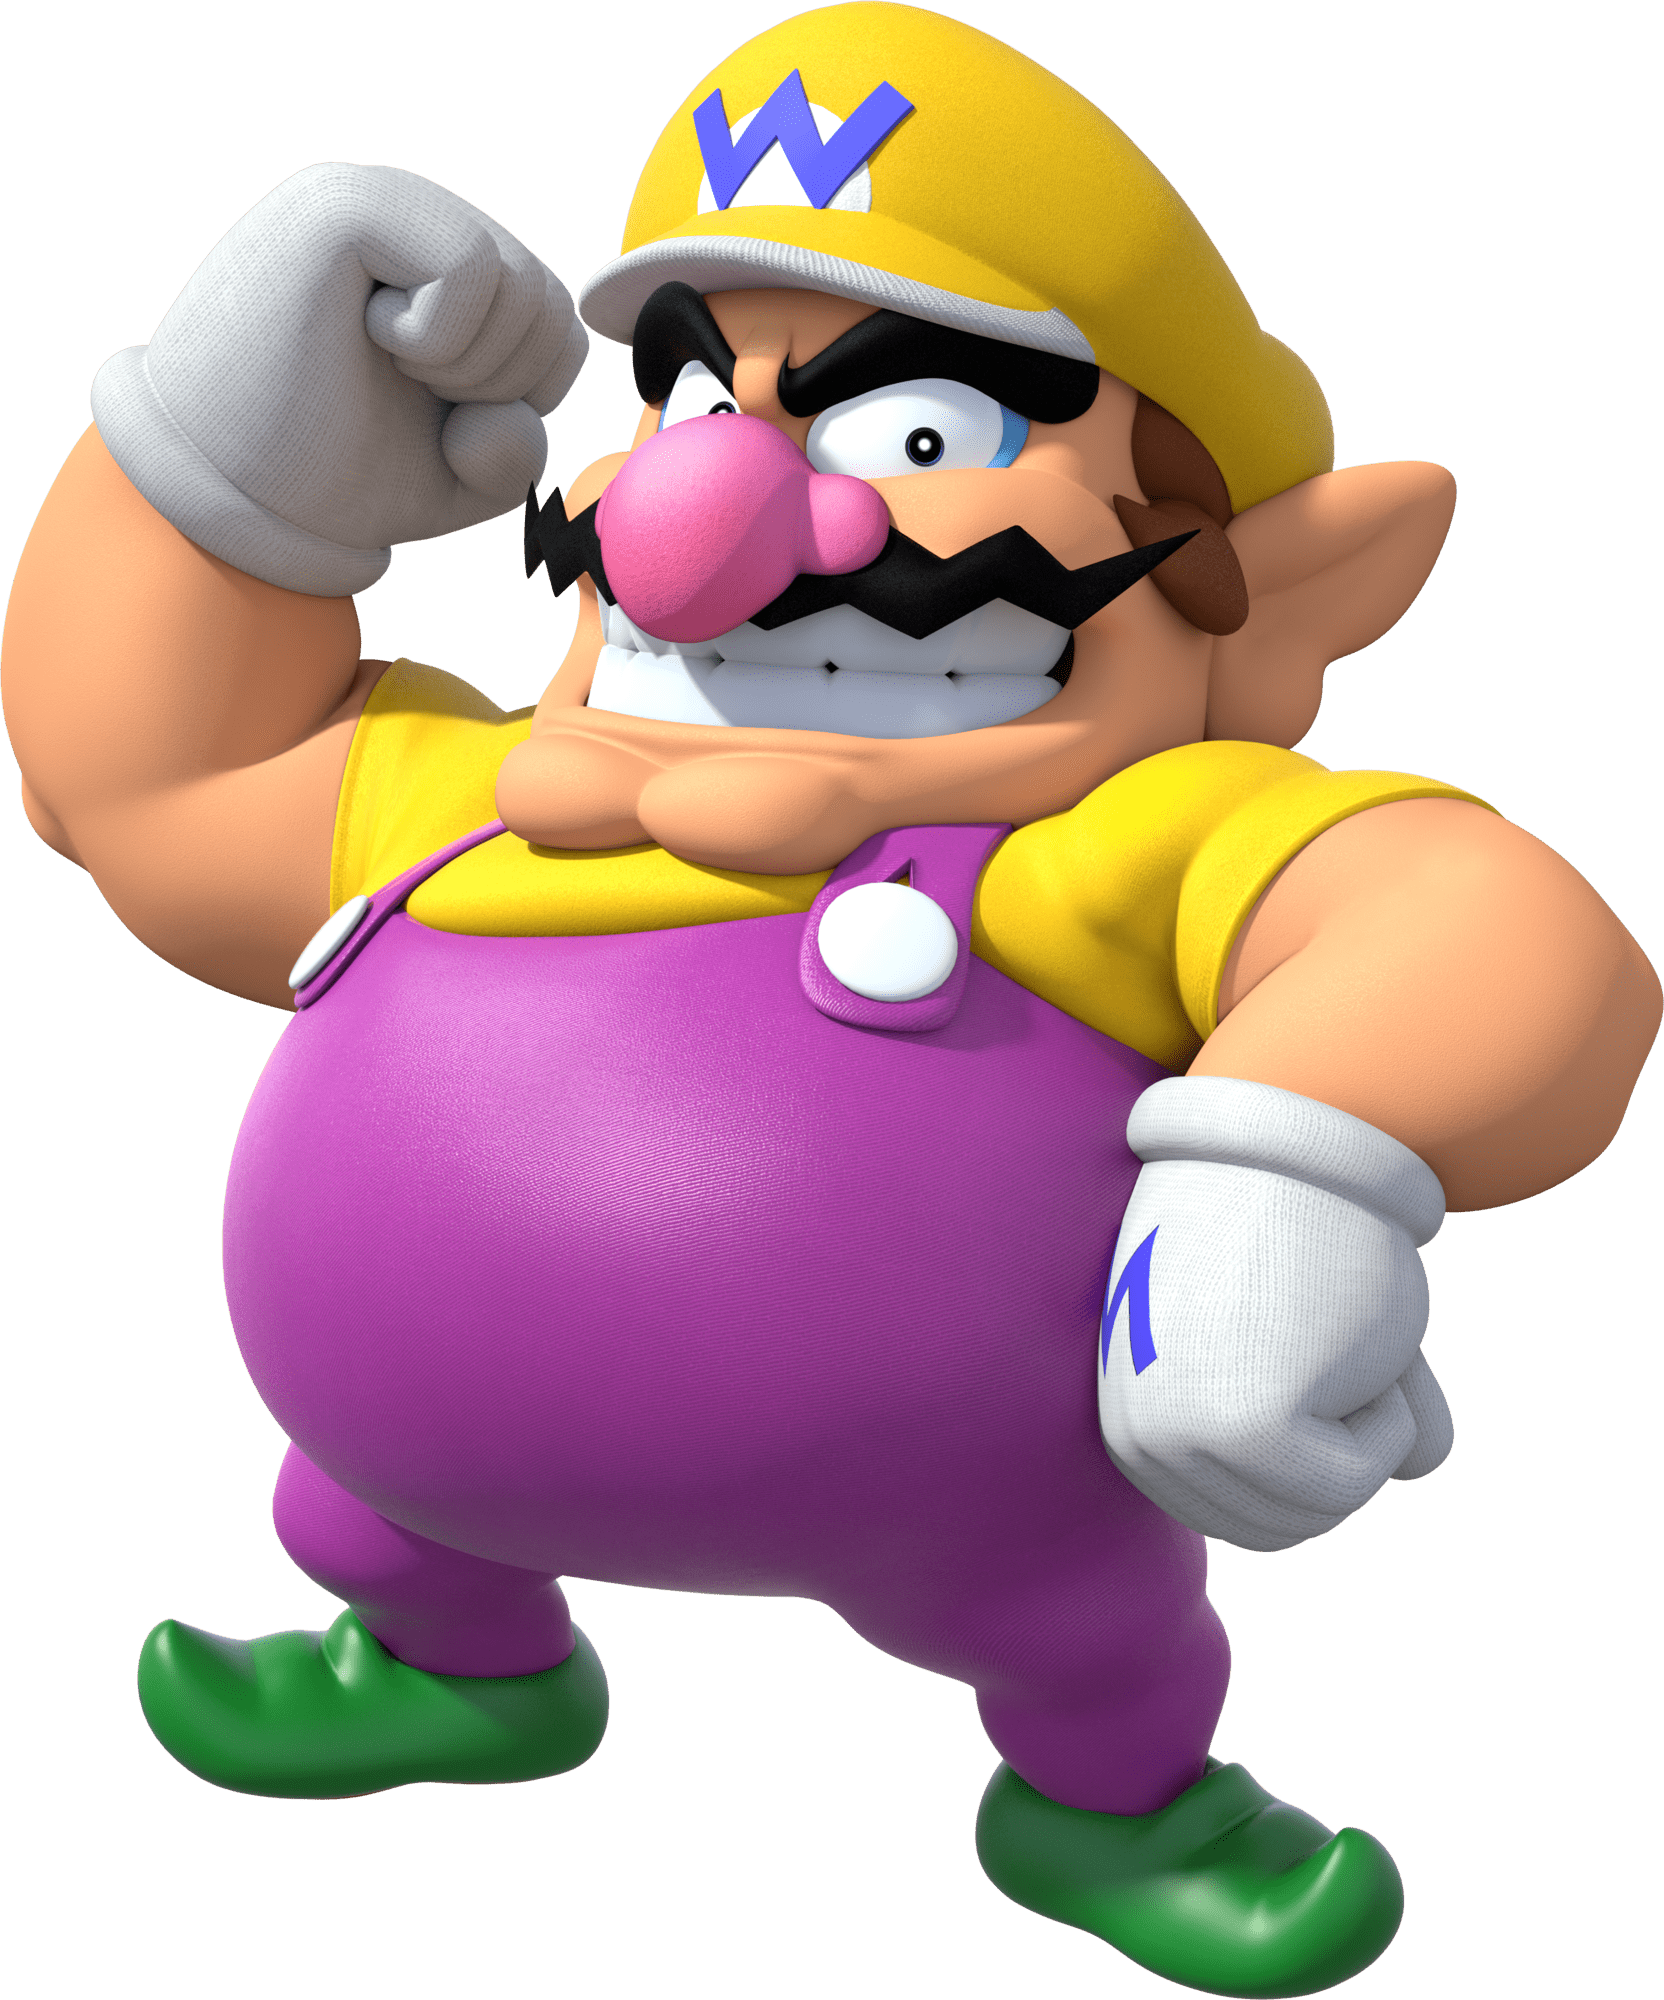 Mario wario screenshots images and pictures giant bomb clipart